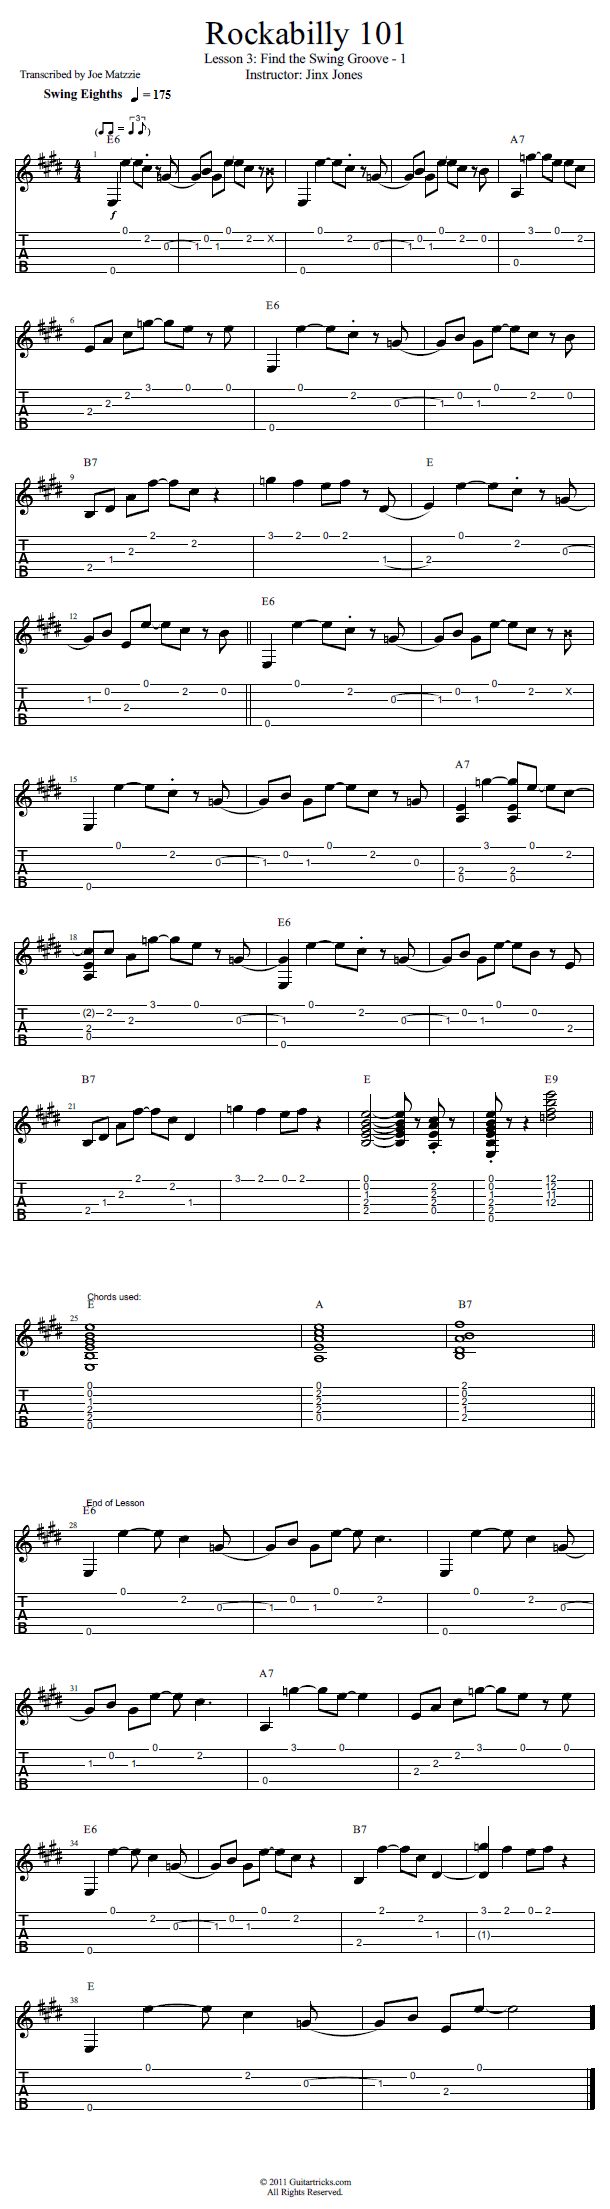 Find the Swing Groove! Part 1 song notation